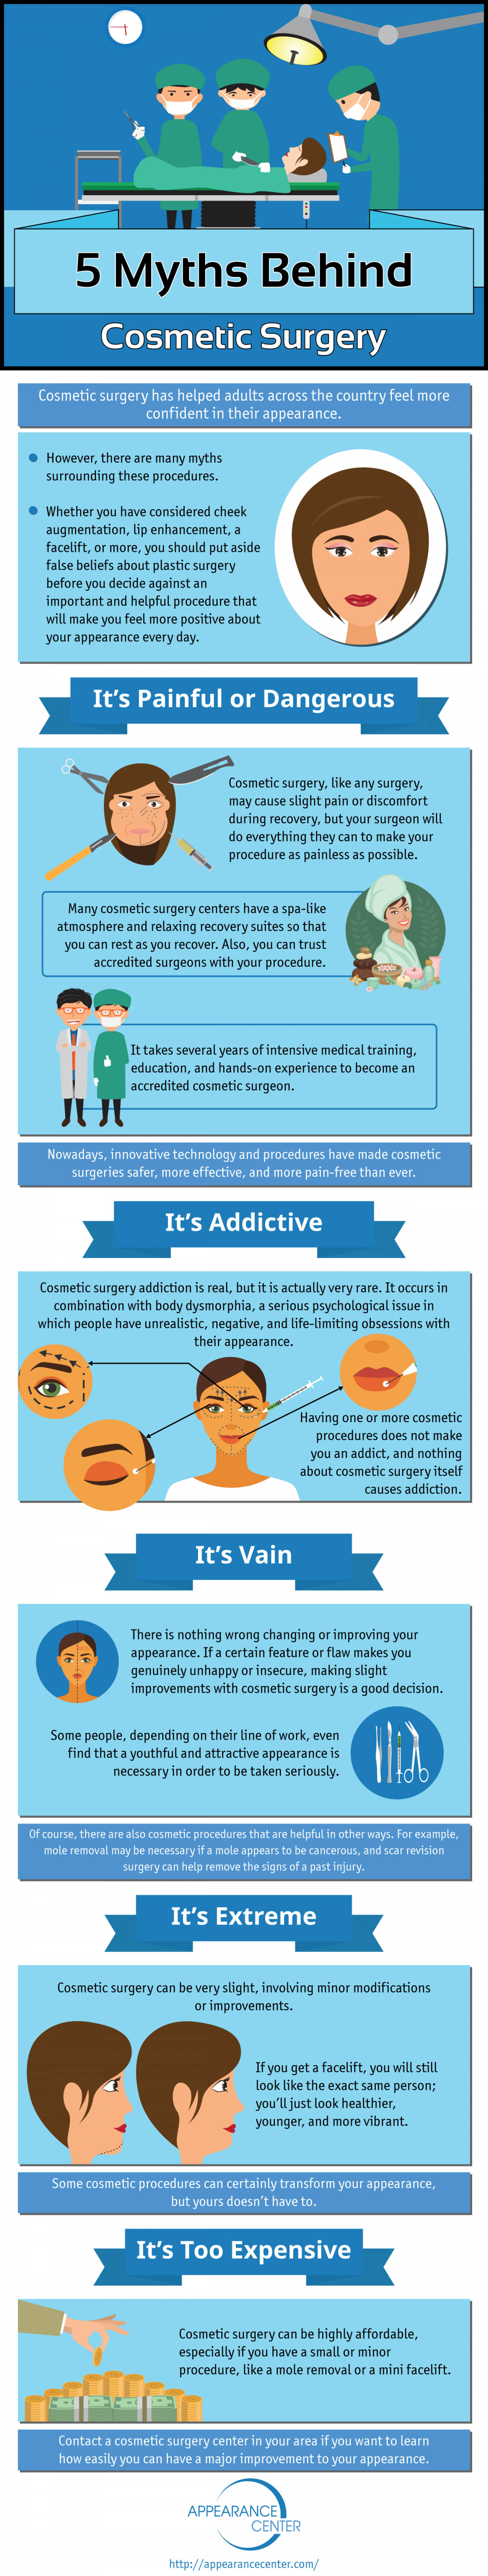 5 Myths Behind Cosmetic Surgery